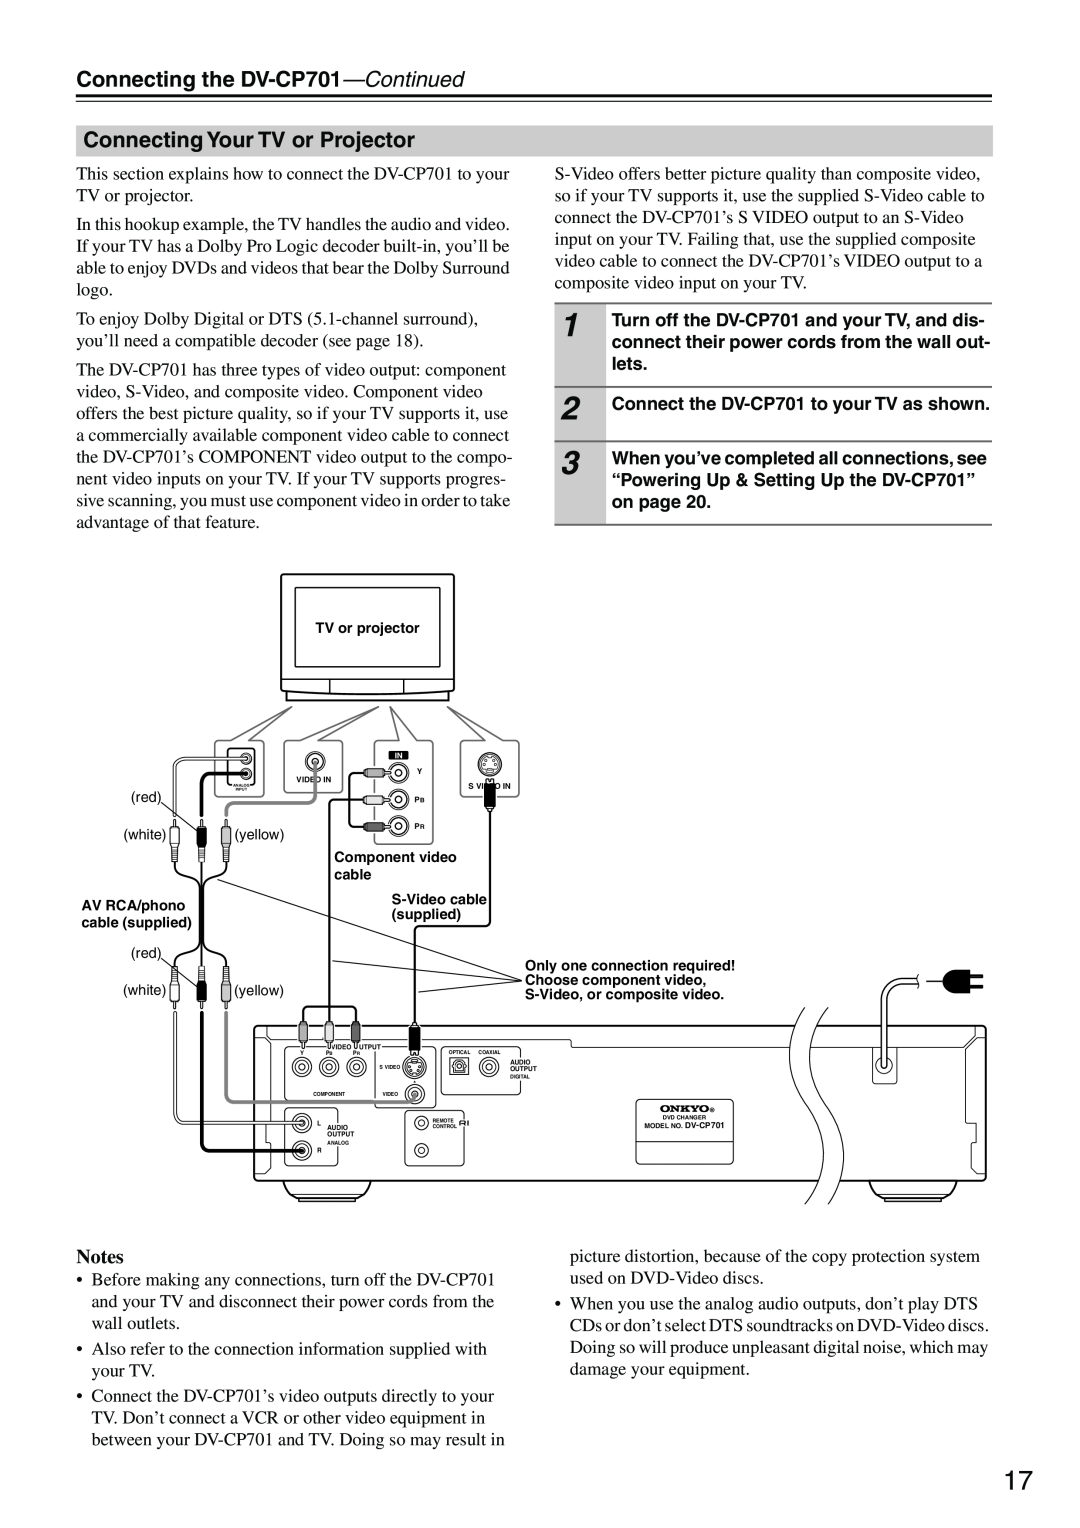 Onkyo instruction manual Connecting the DV-CP701—Continued, Connecting Your TV or Projector, Notes, lets, on page 